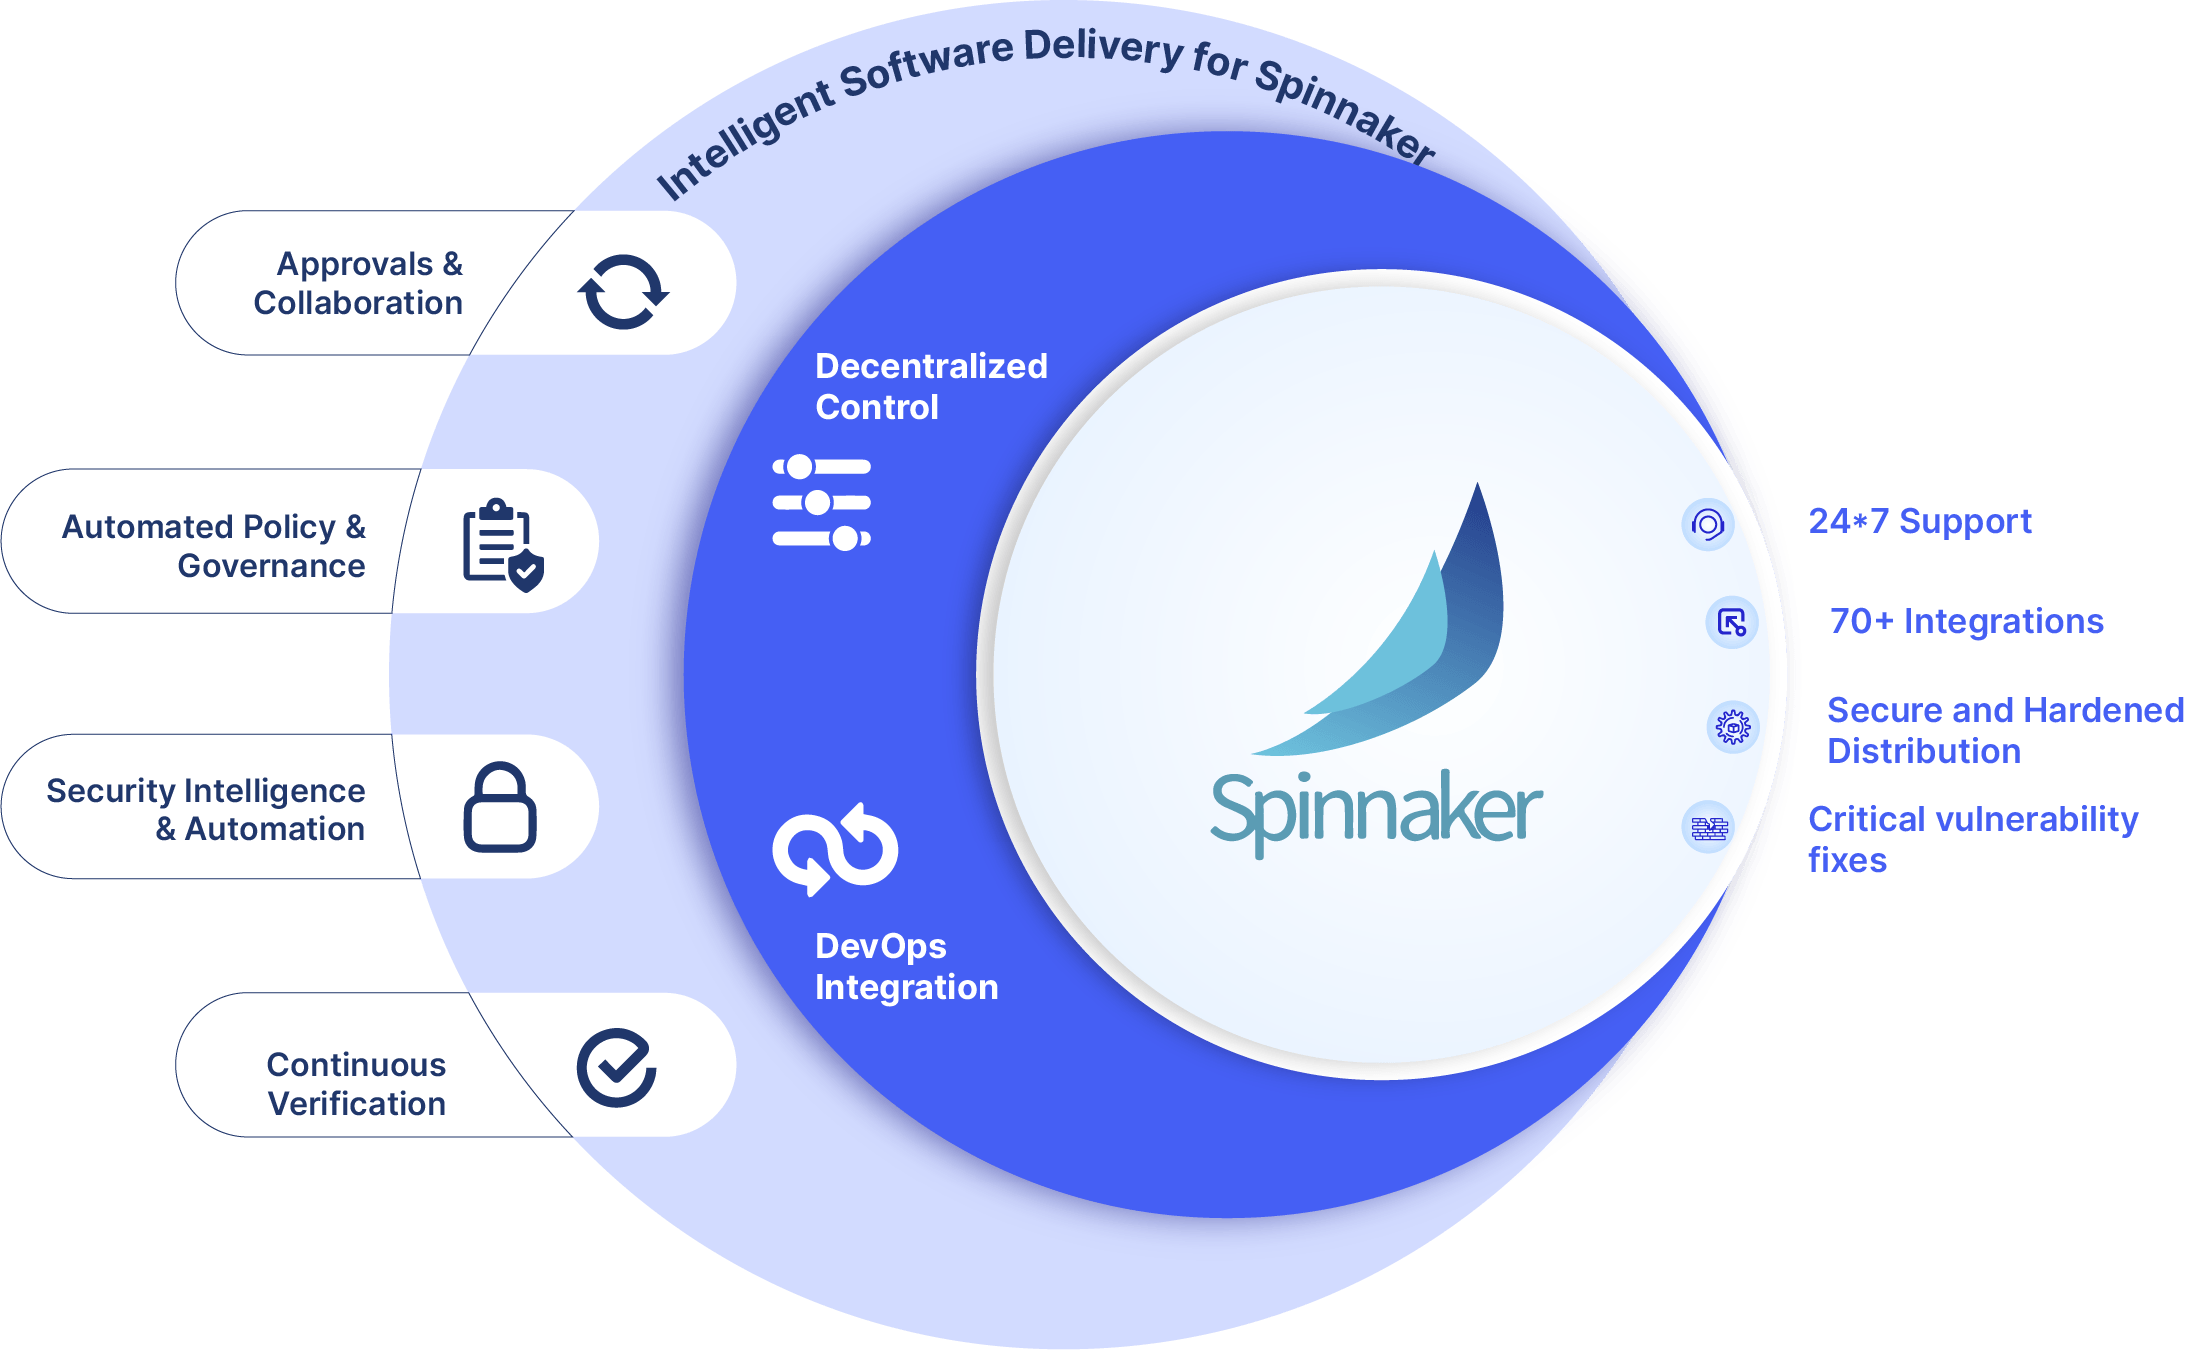 Intelligent Software Delivery (ISD) for Spinnaker